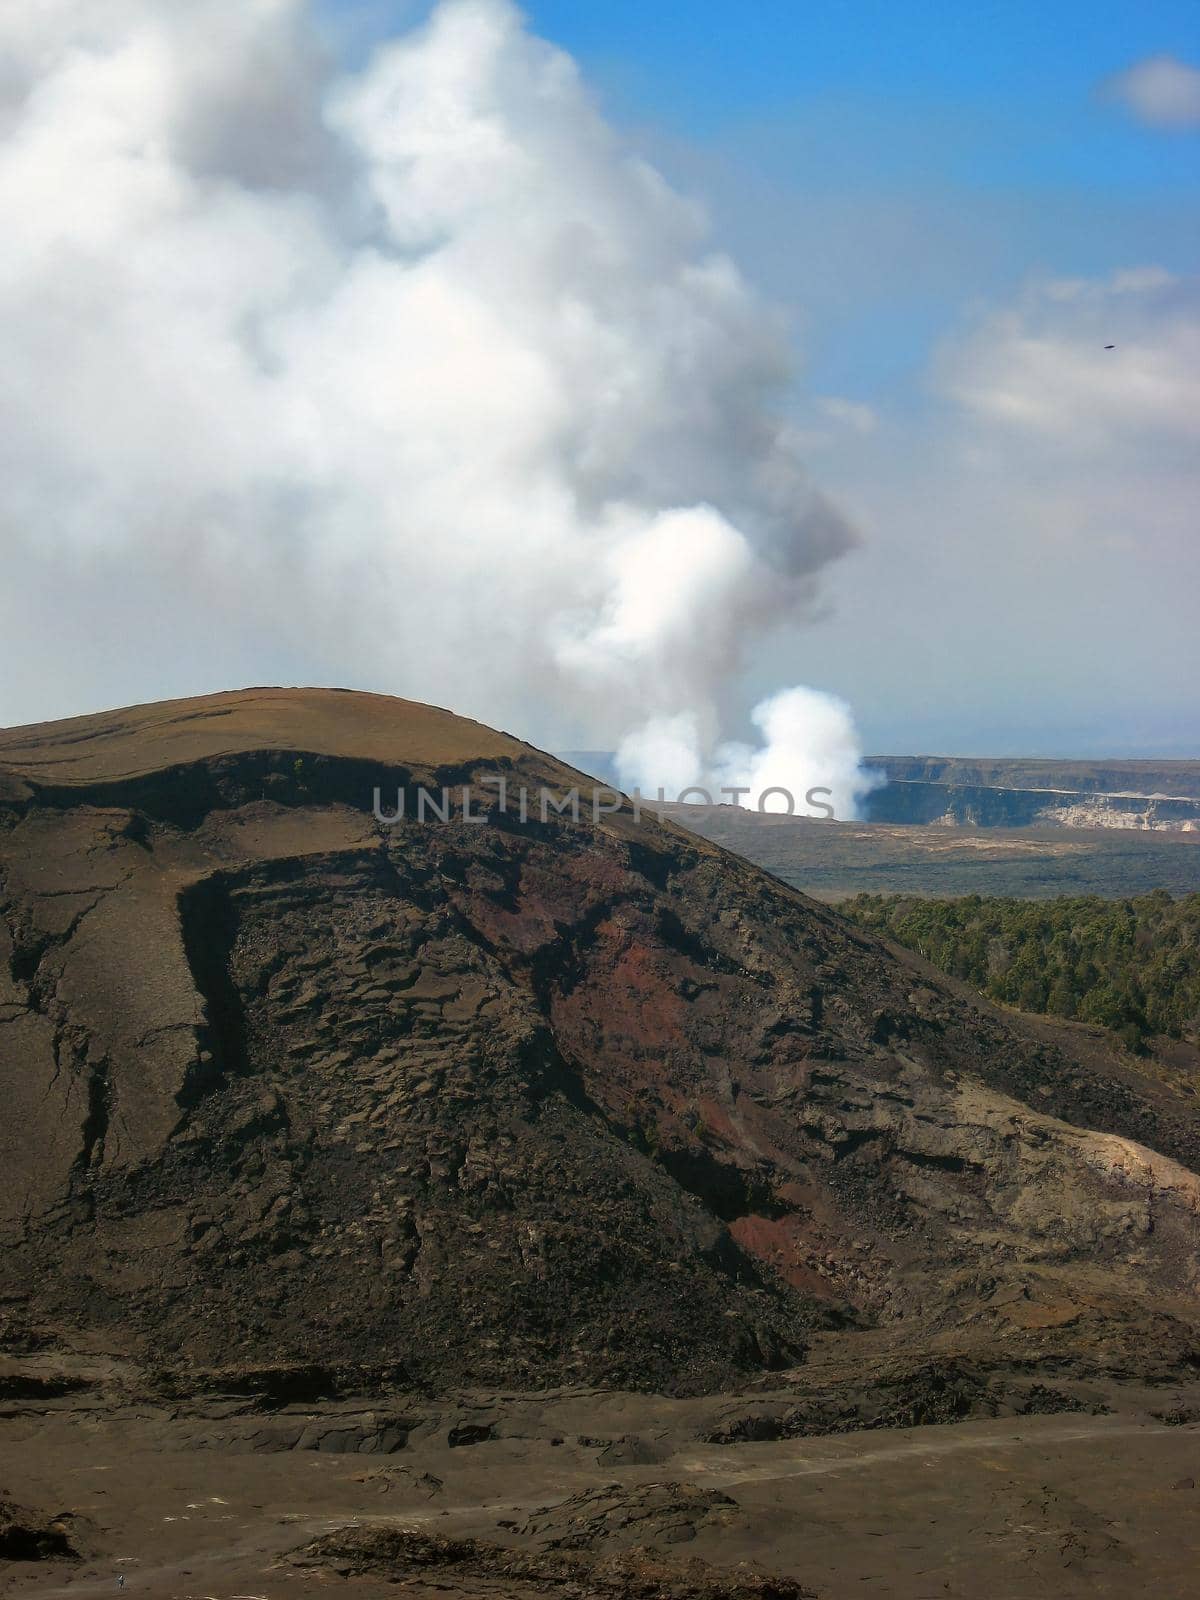 Smoking Crater of Halemaumau Kilauea Volcano in Hawaii Volcanoes National Park on Big Island with lava dome in foreground. High quality photo